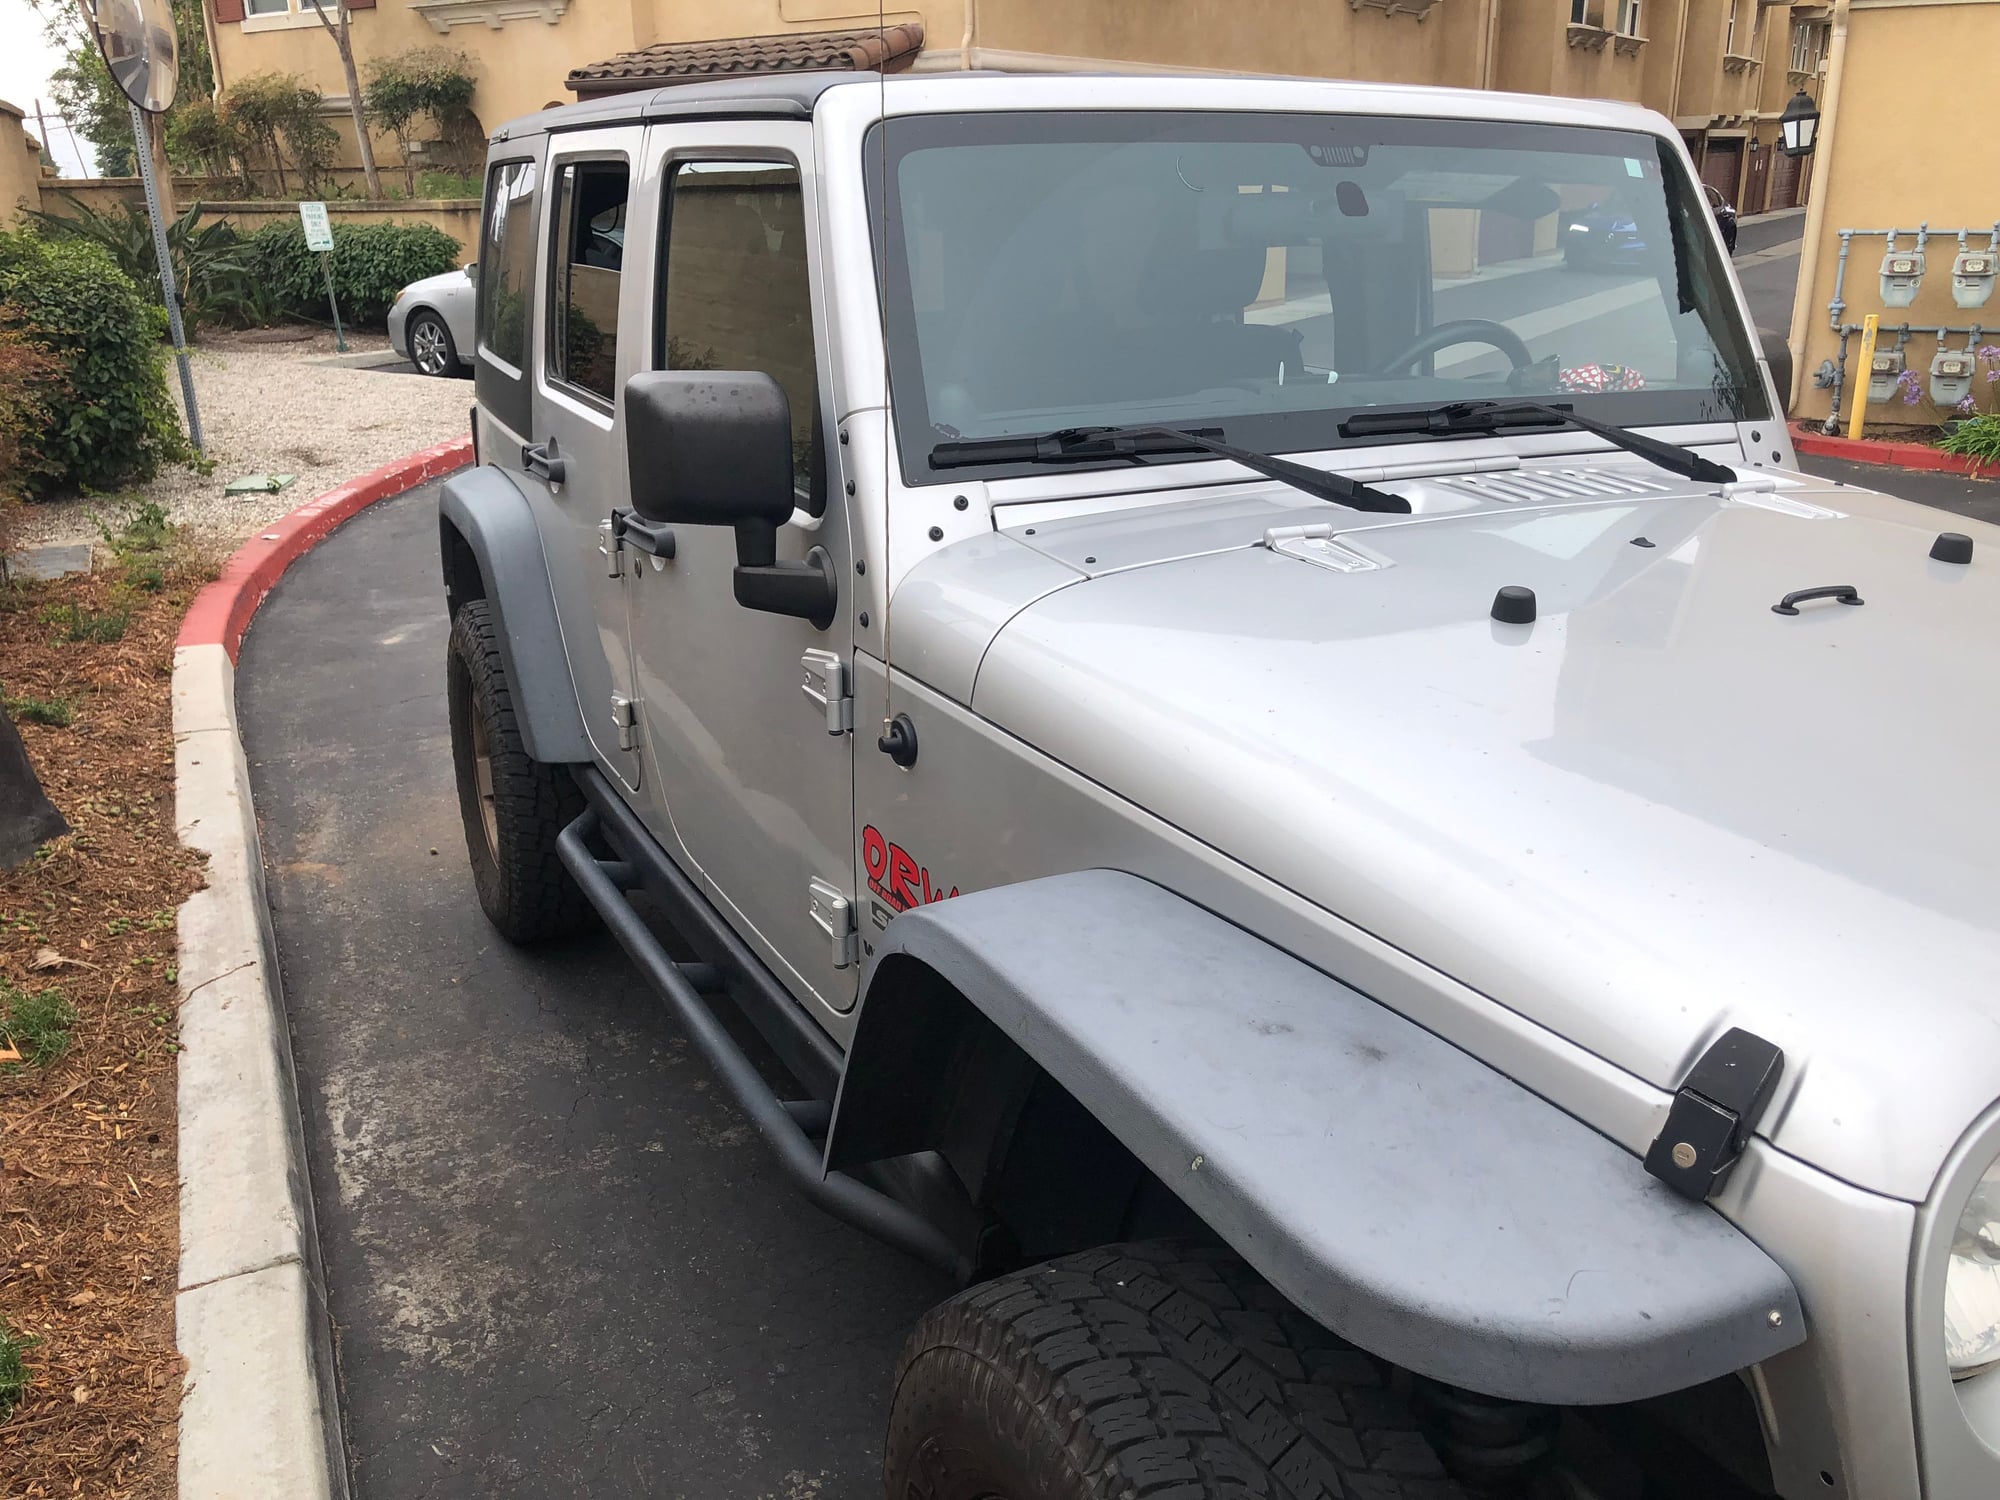 2011 Jeep Wrangler - 2011 JKU $11,000 - Used - VIN 1j4ha3h19bl523267 - 123,412 Miles - 6 cyl - 4WD - Automatic - SUV - Silver - Torrance, CA 90501, United States